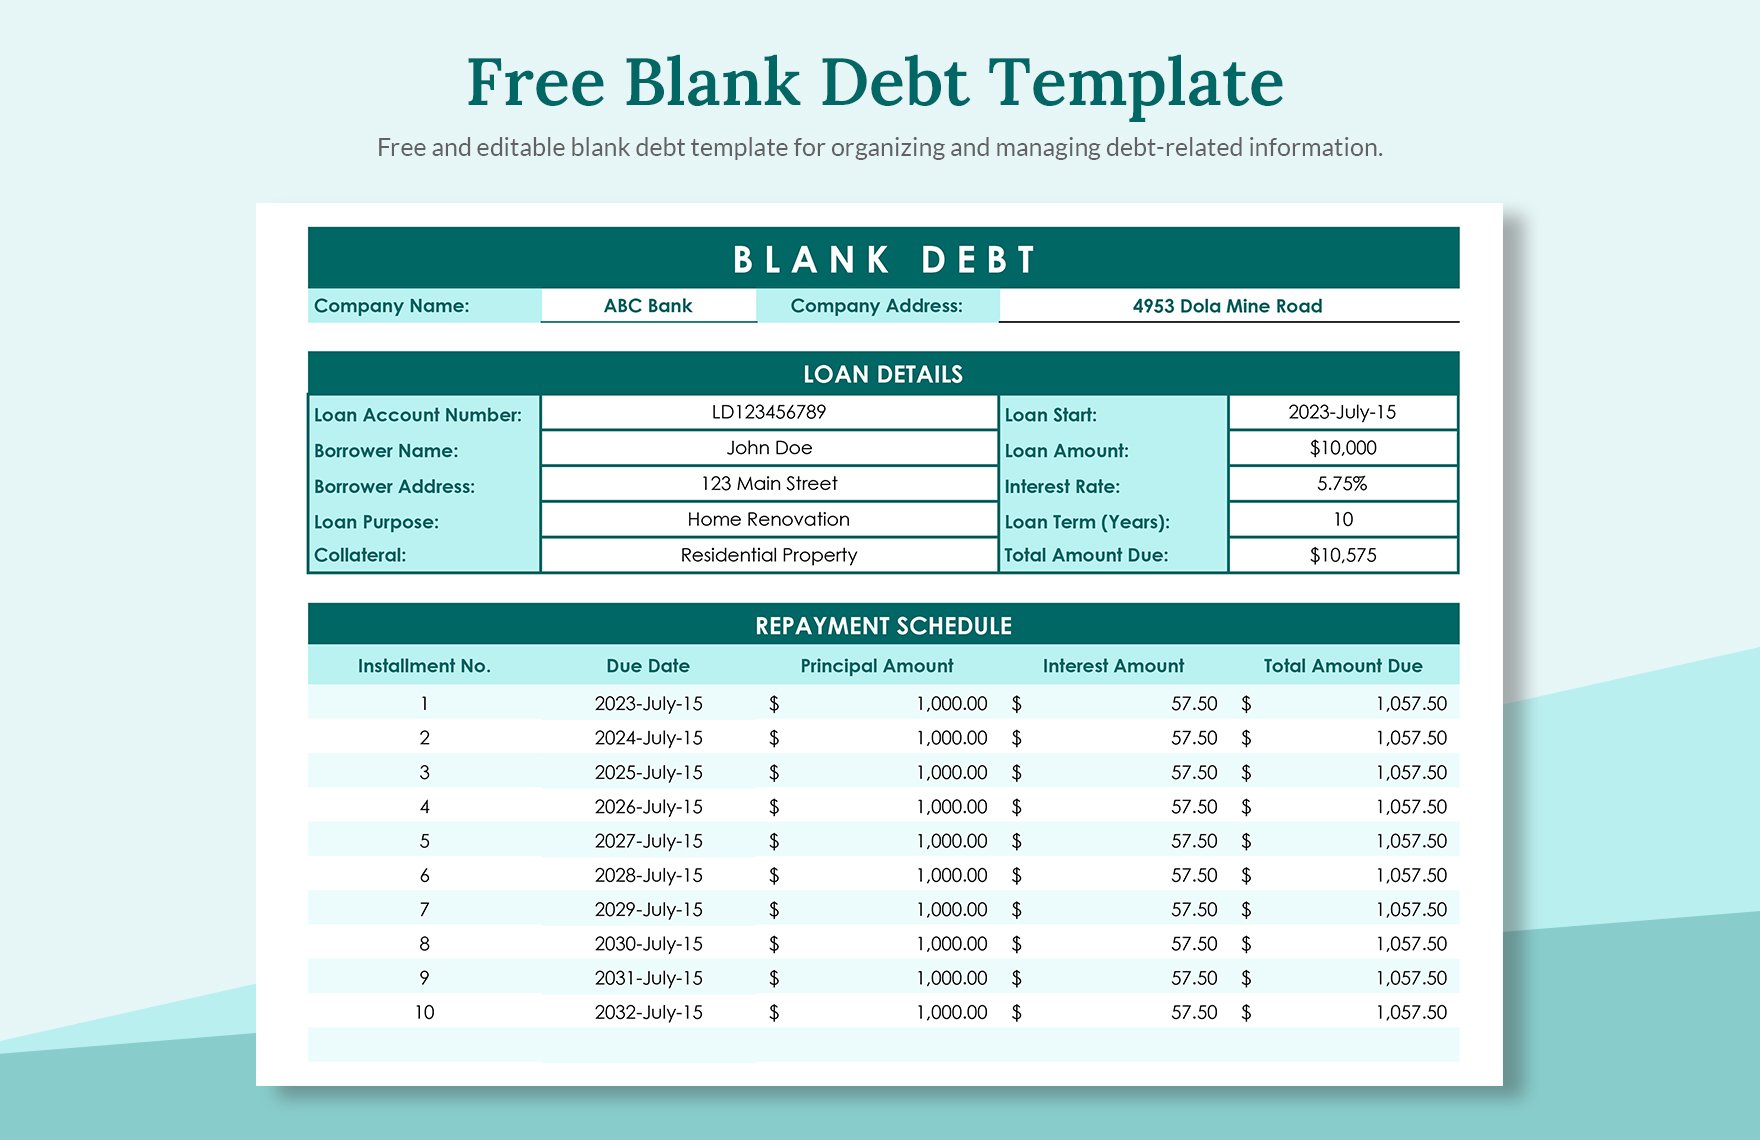 Free Blank Debt Template in Excel, Google Sheets